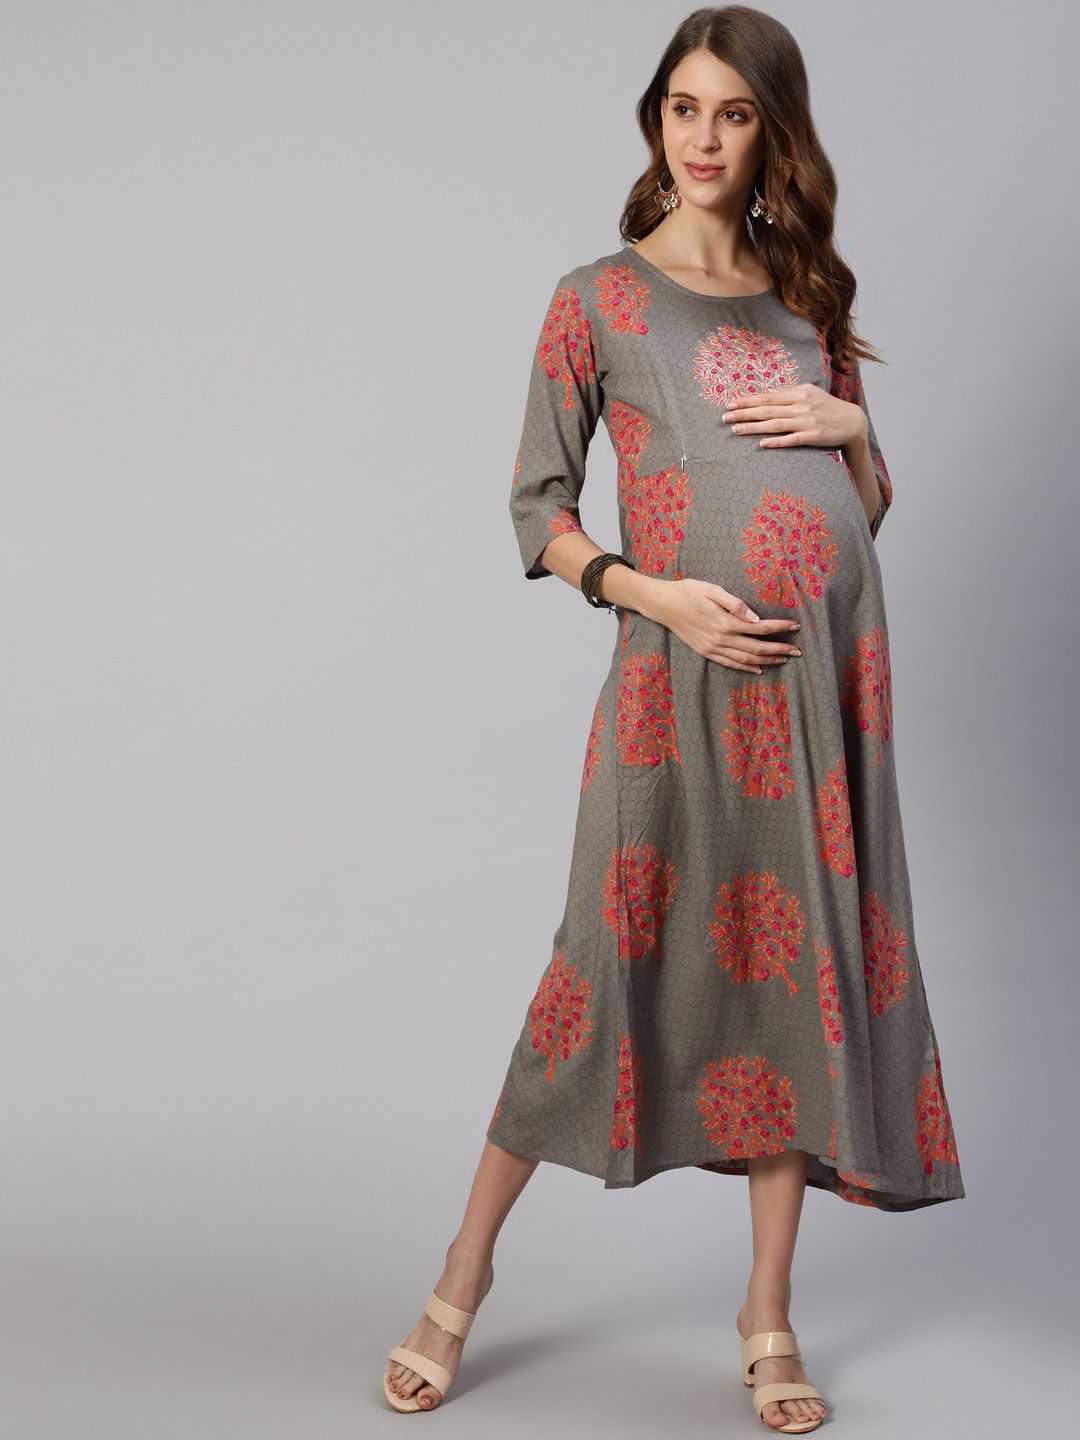 Anubhutee Grey & Pink Floral Maternity A-Line Midi Dress Price in India